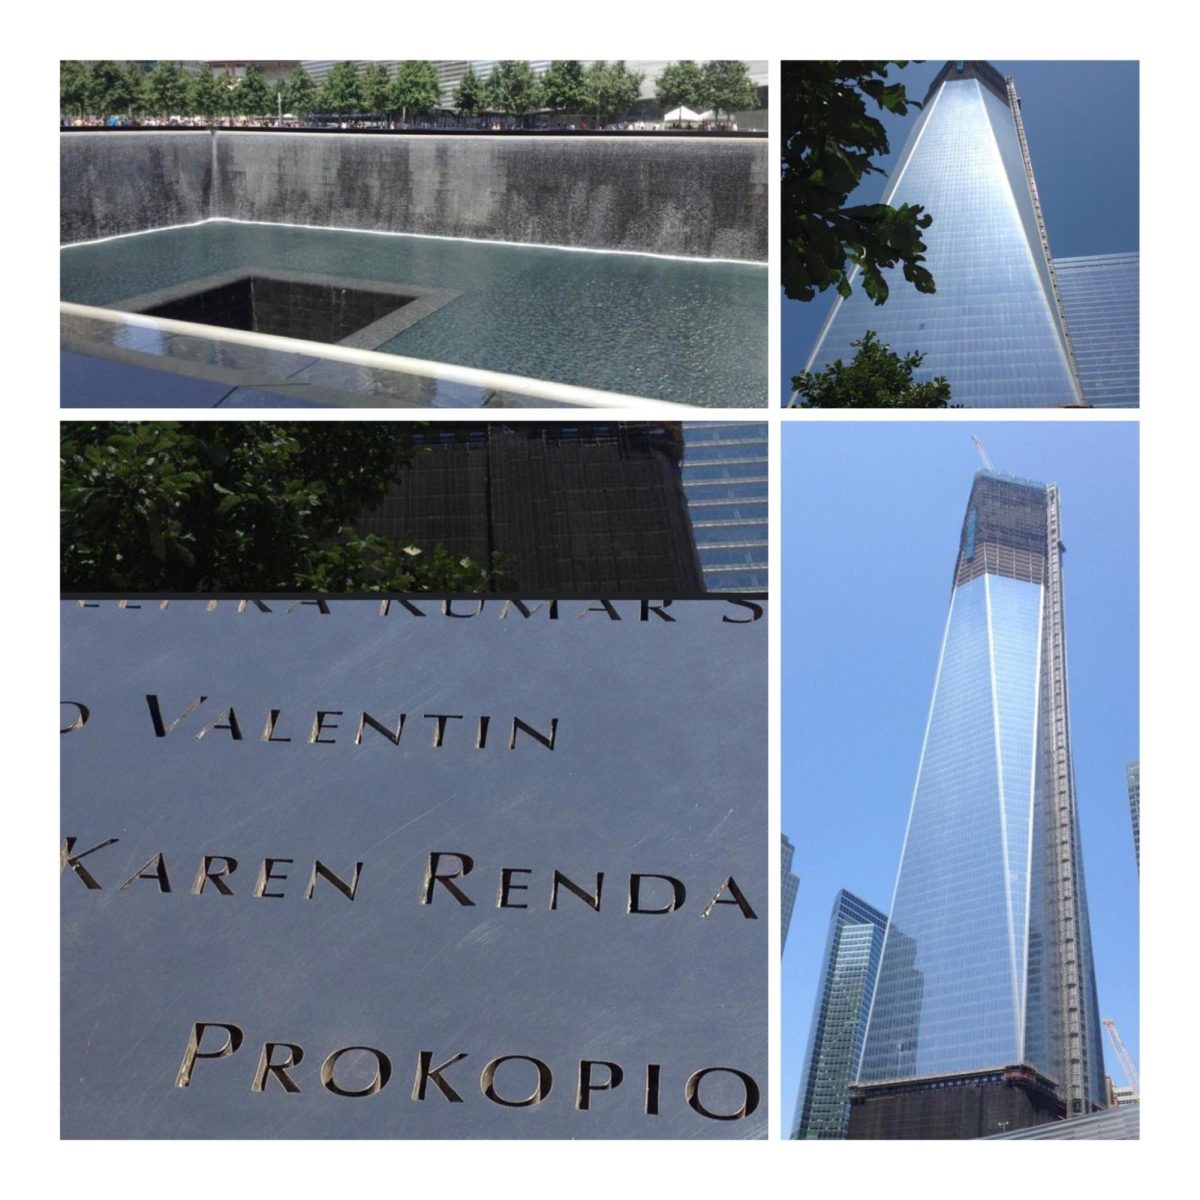 Mrs. Child took pictures of her cousins name, Karen Renda, at the 9/11 memorial in New York City on her trip in 2011. The memorial is open to the public and is one way to honor those lost in the attack.
